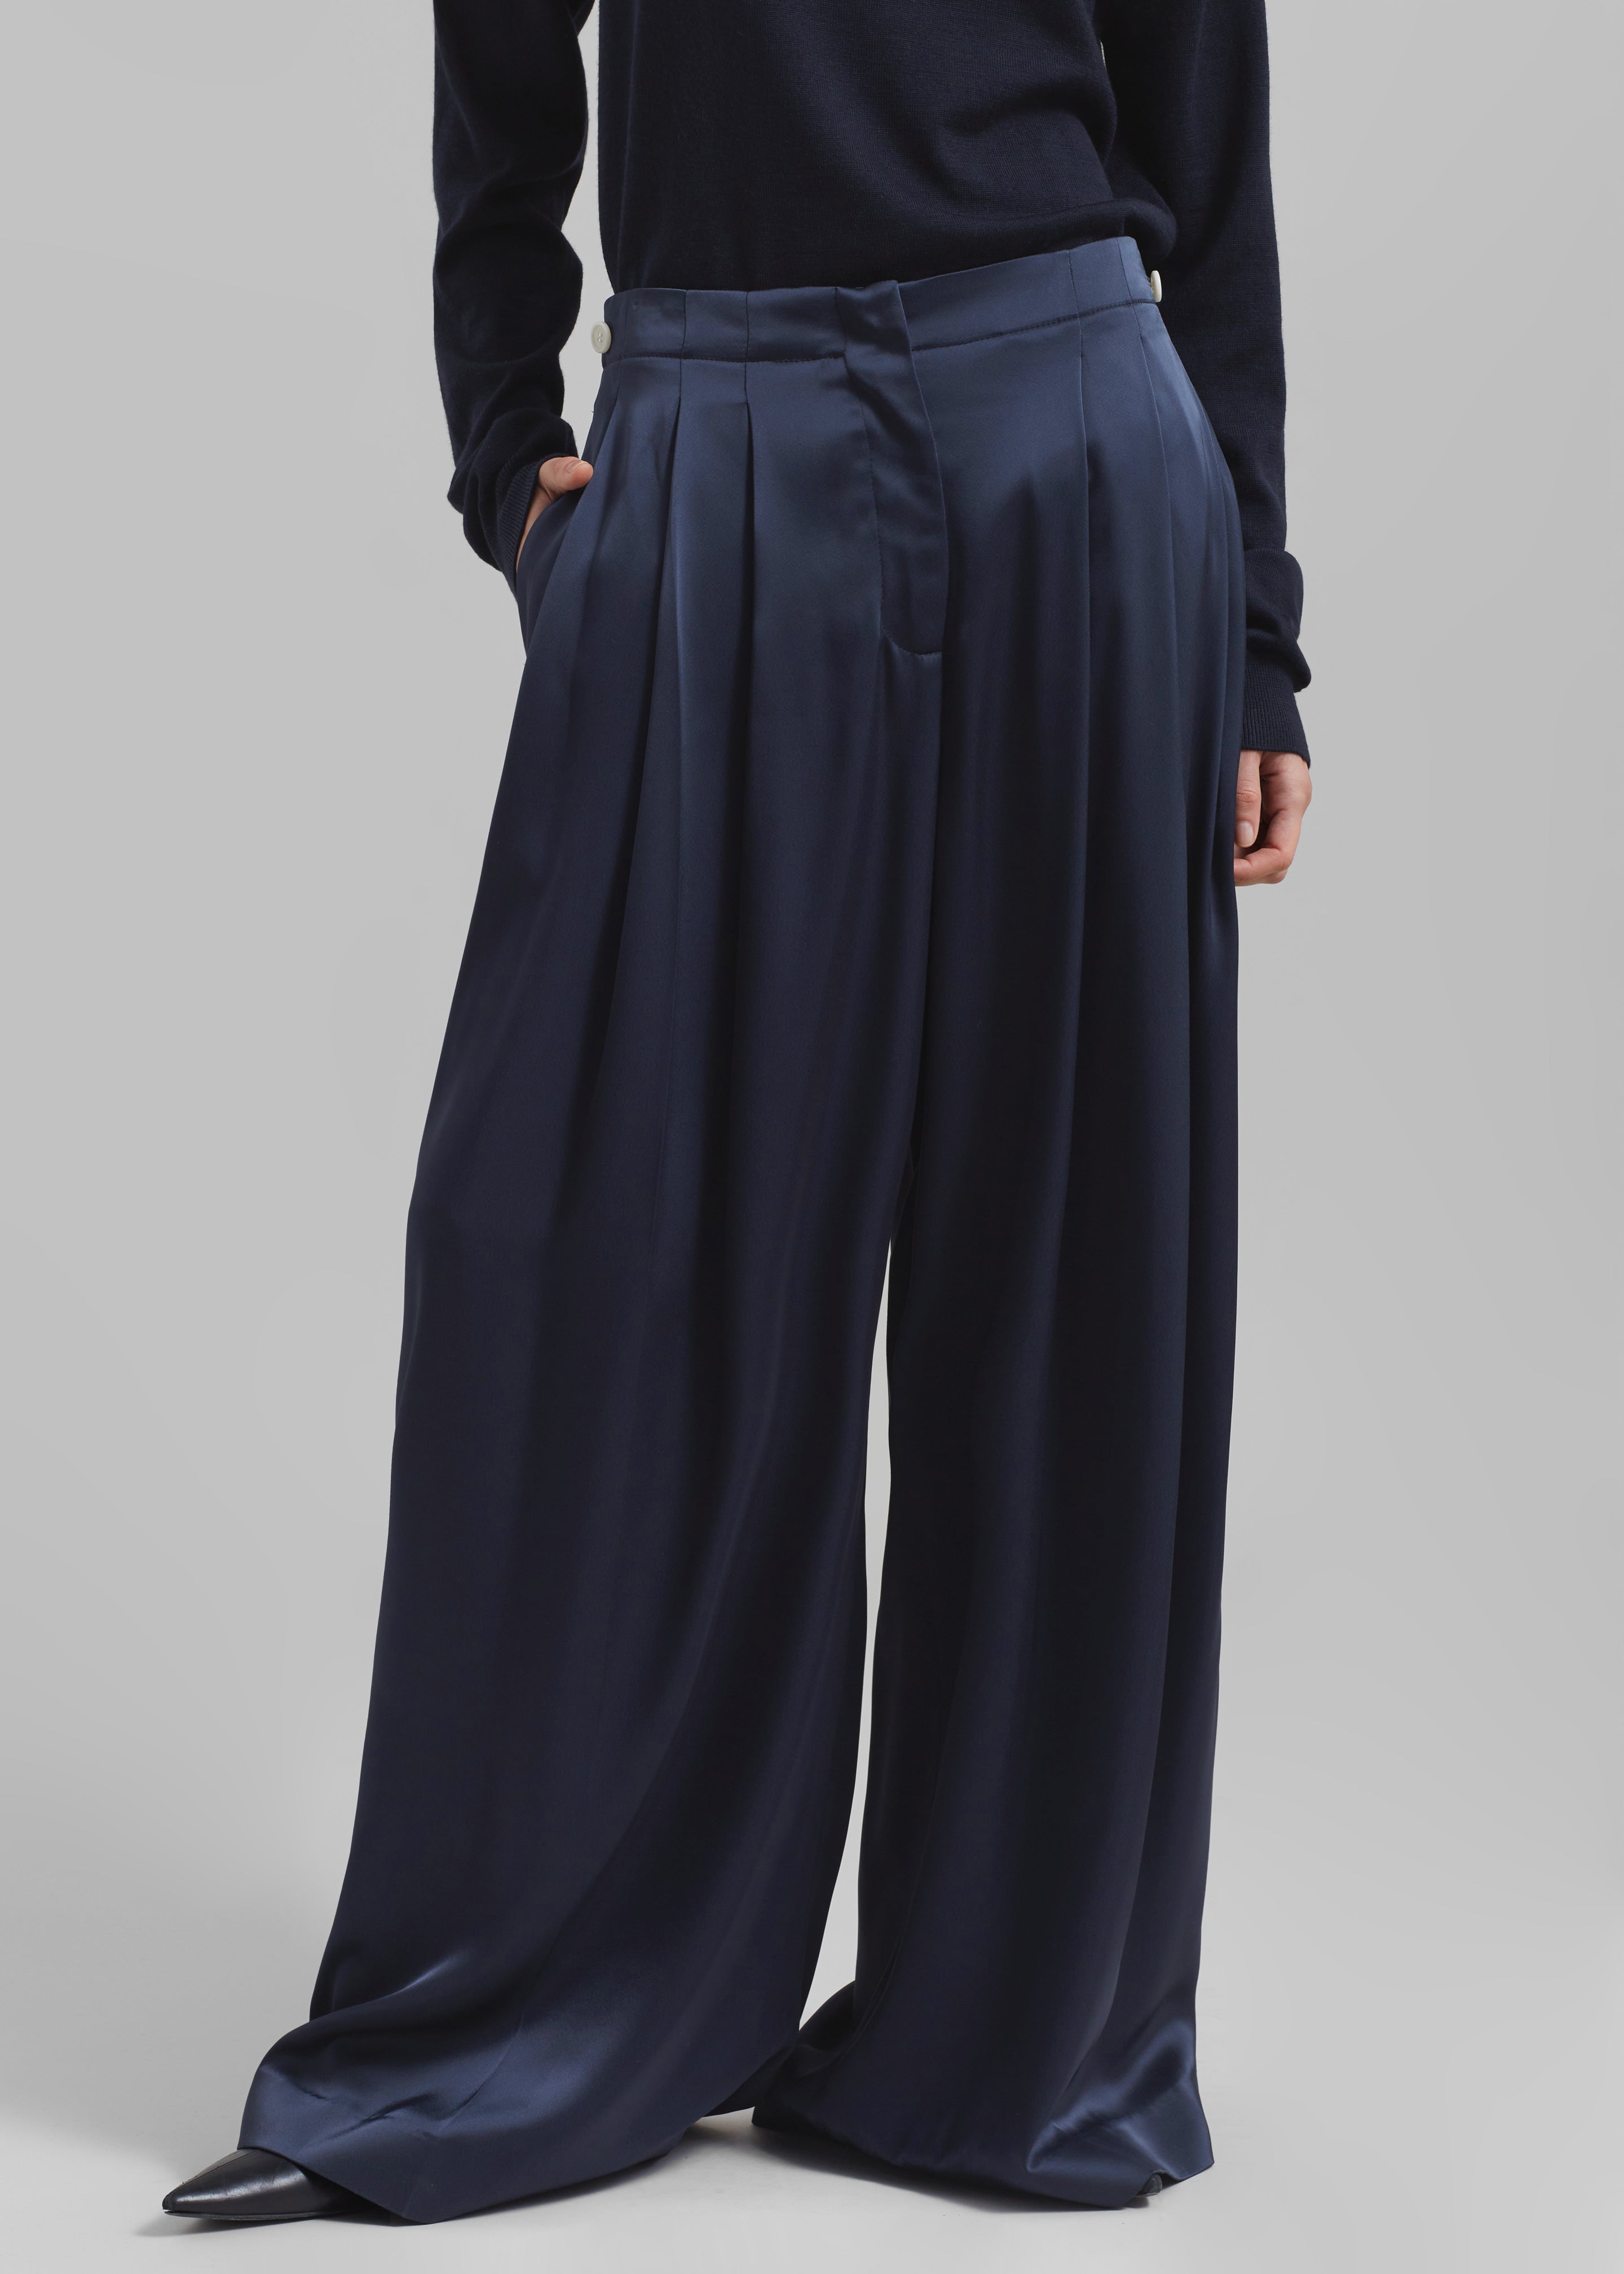 JW Anderson Crossover Strap Wide Leg Trousers - Navy - 2